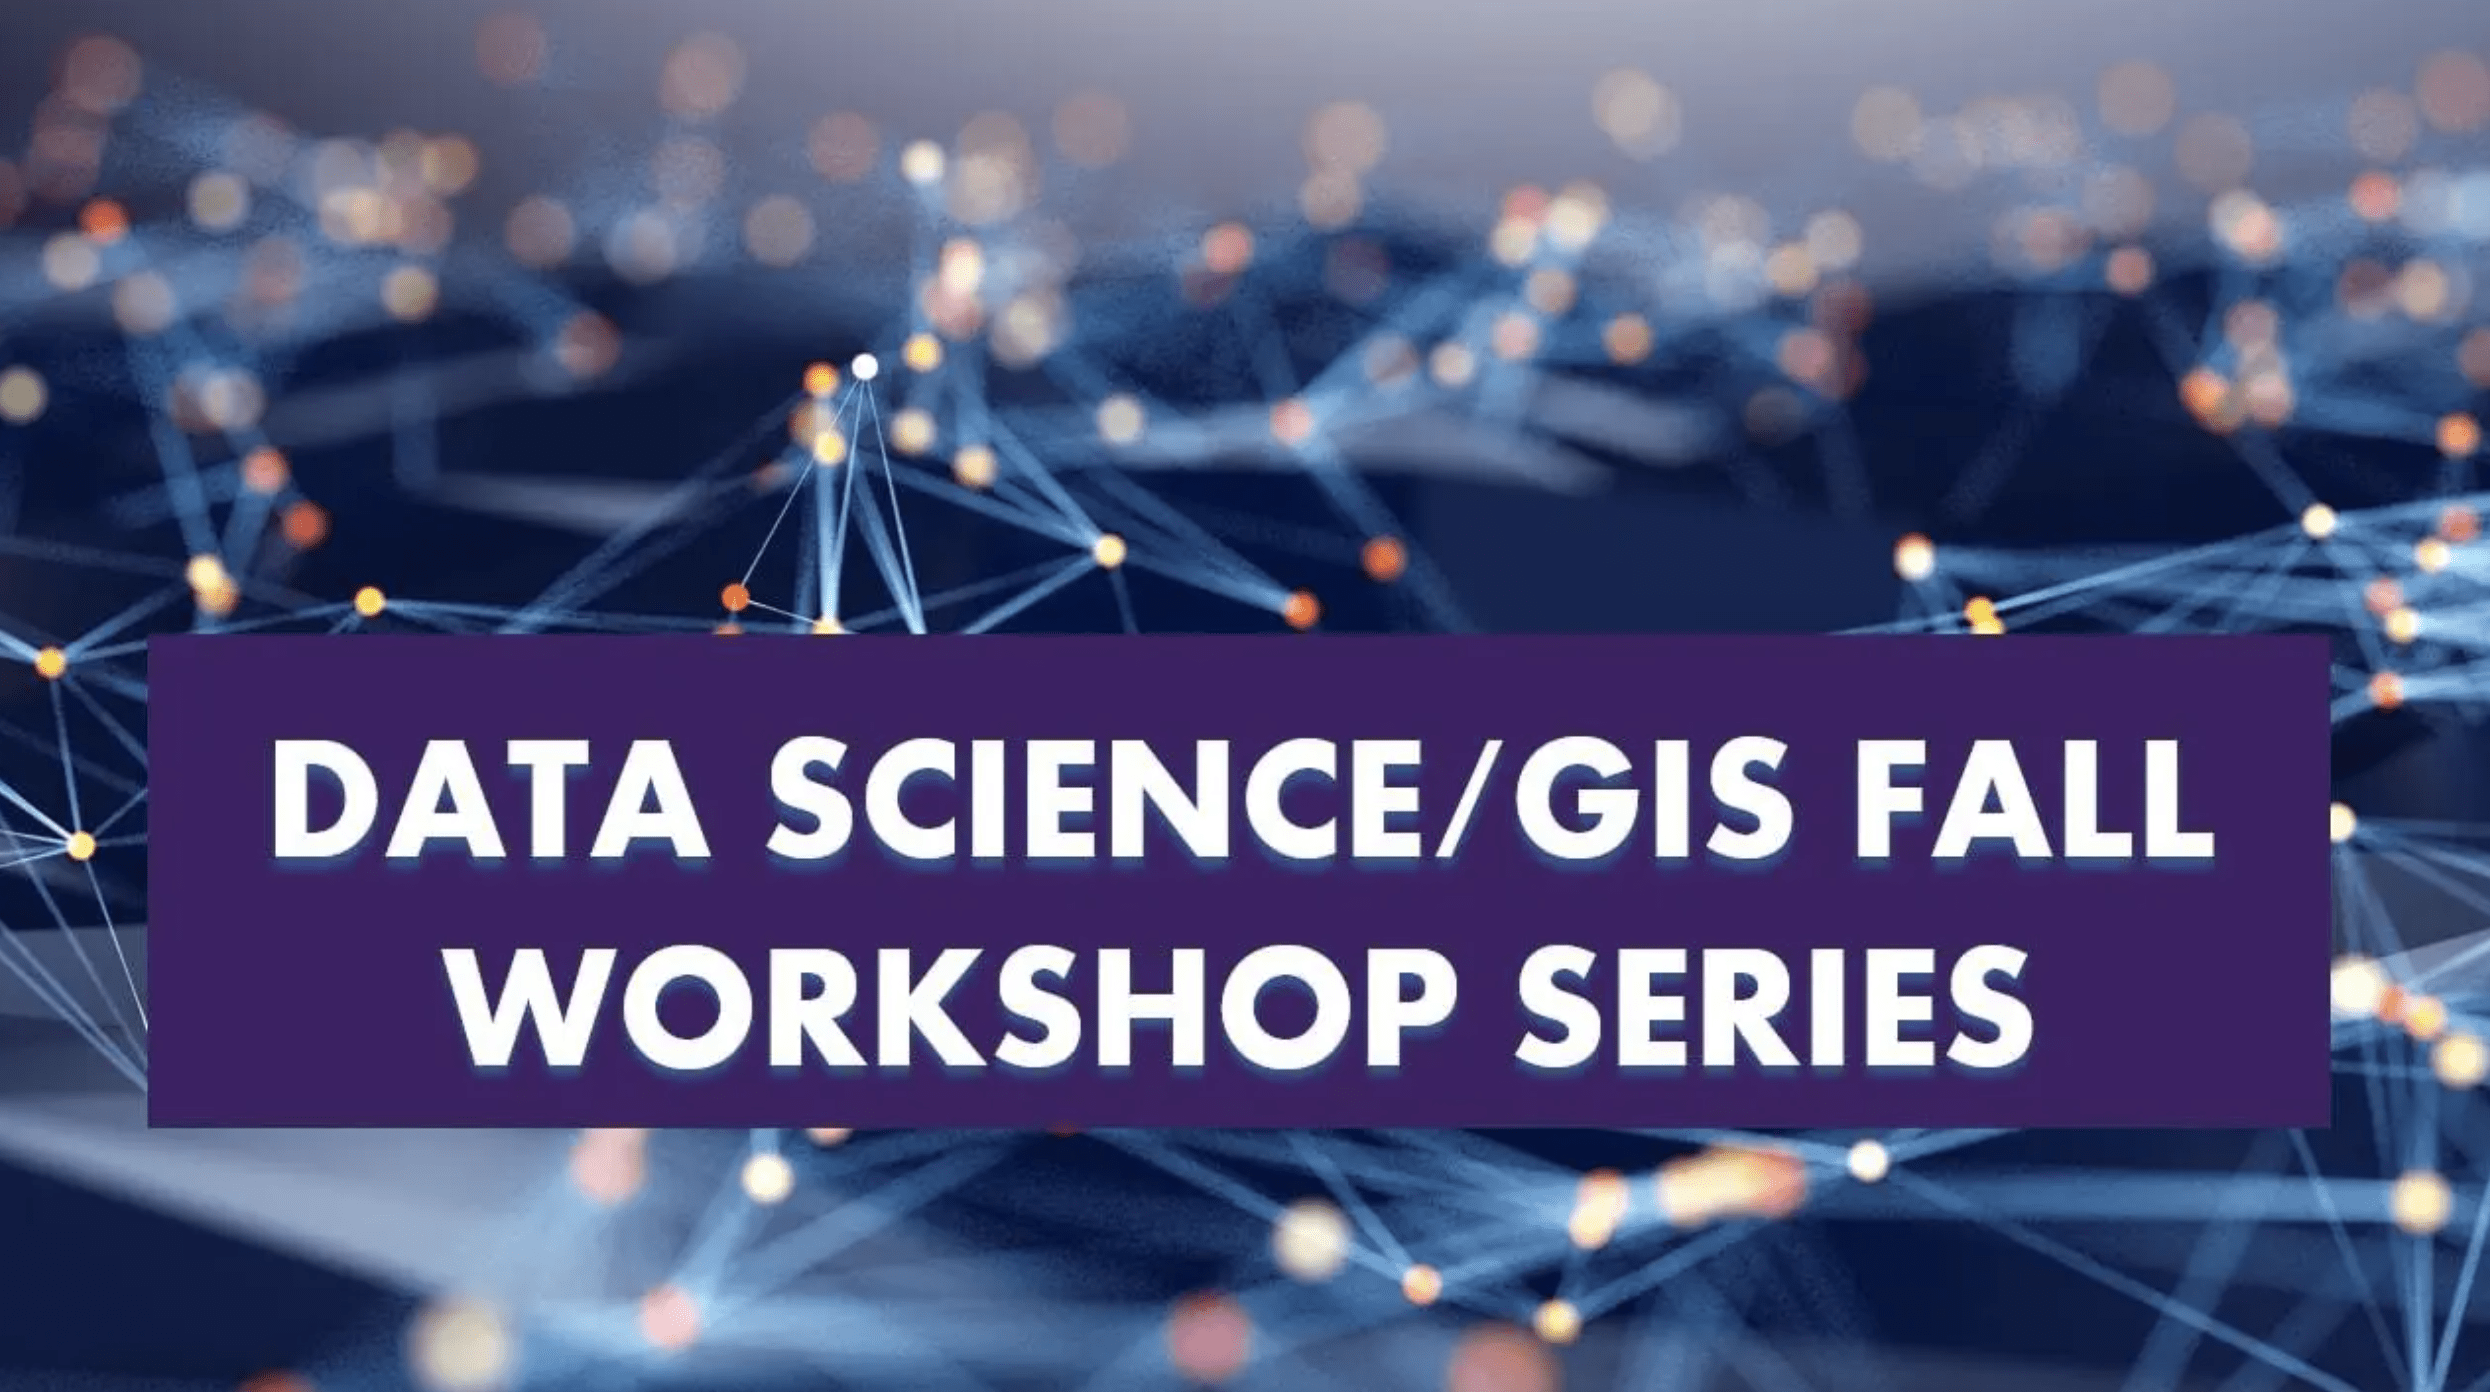 Data science/GIS fall workshop series